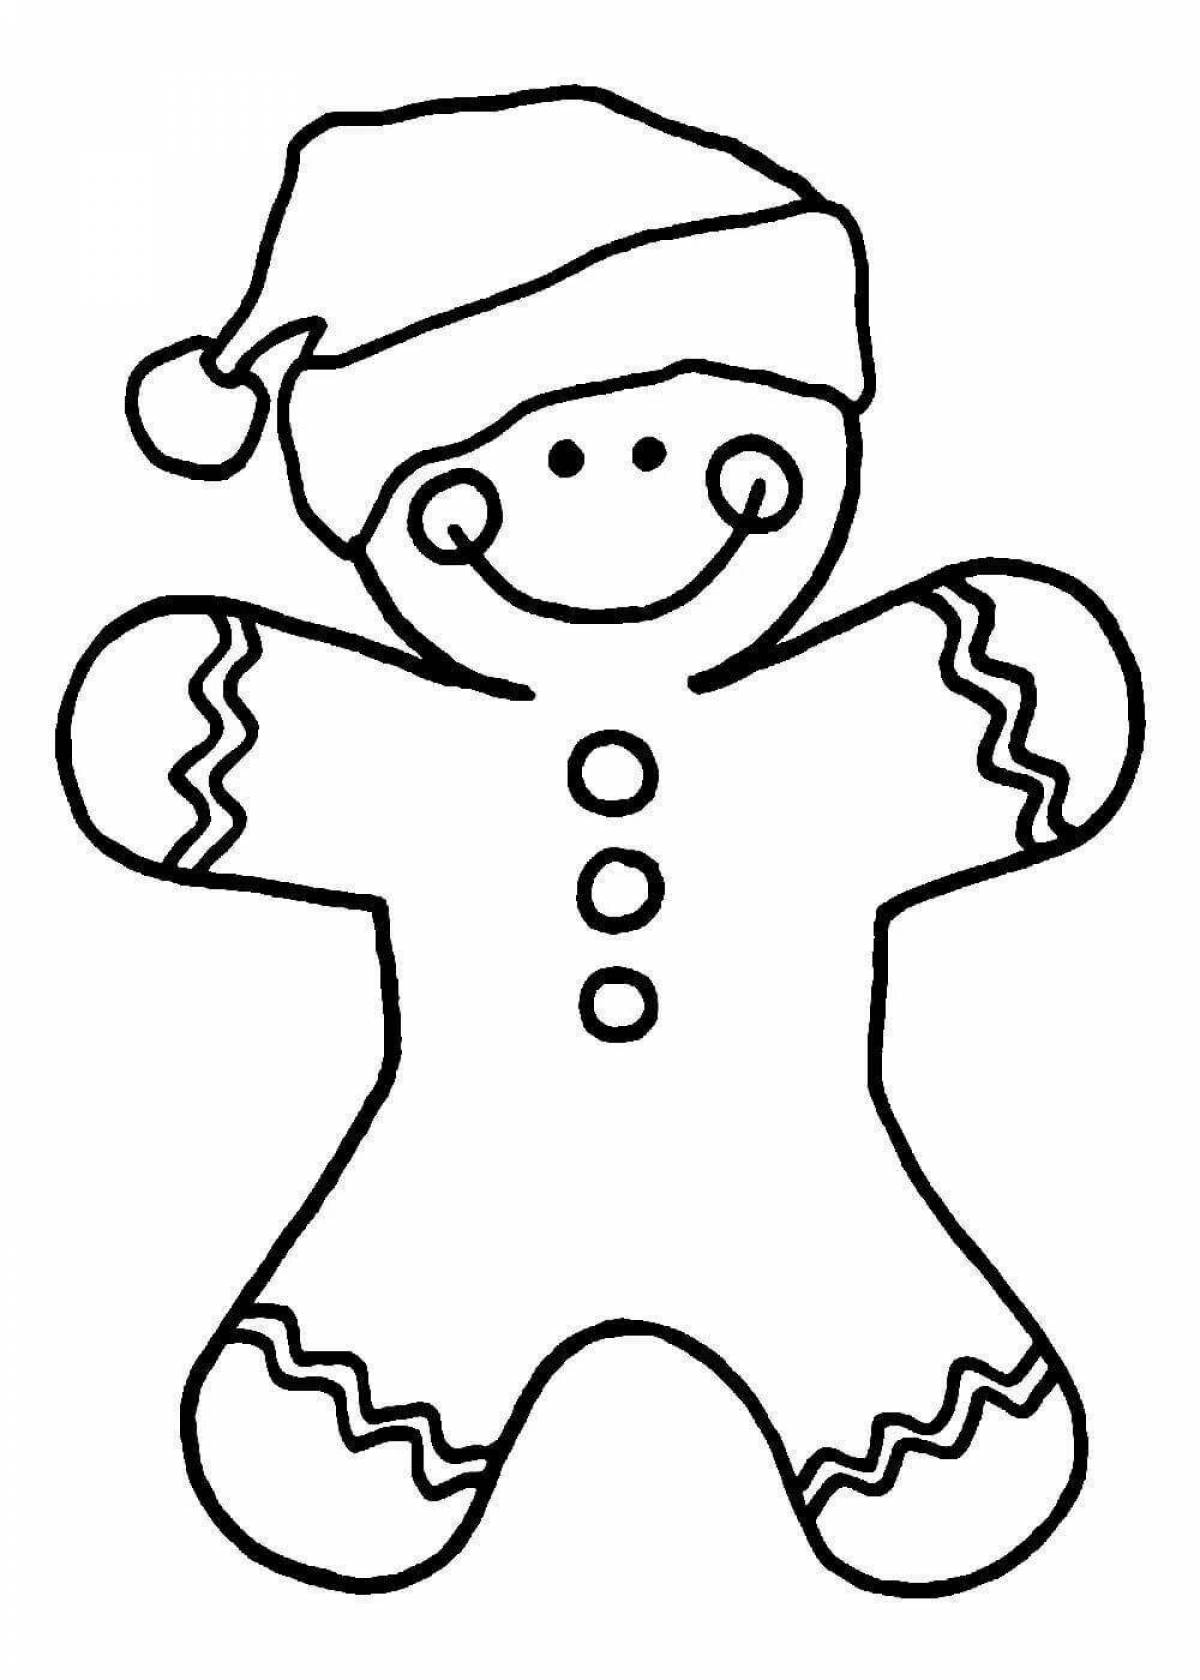 Coloring page playful gingerbread man